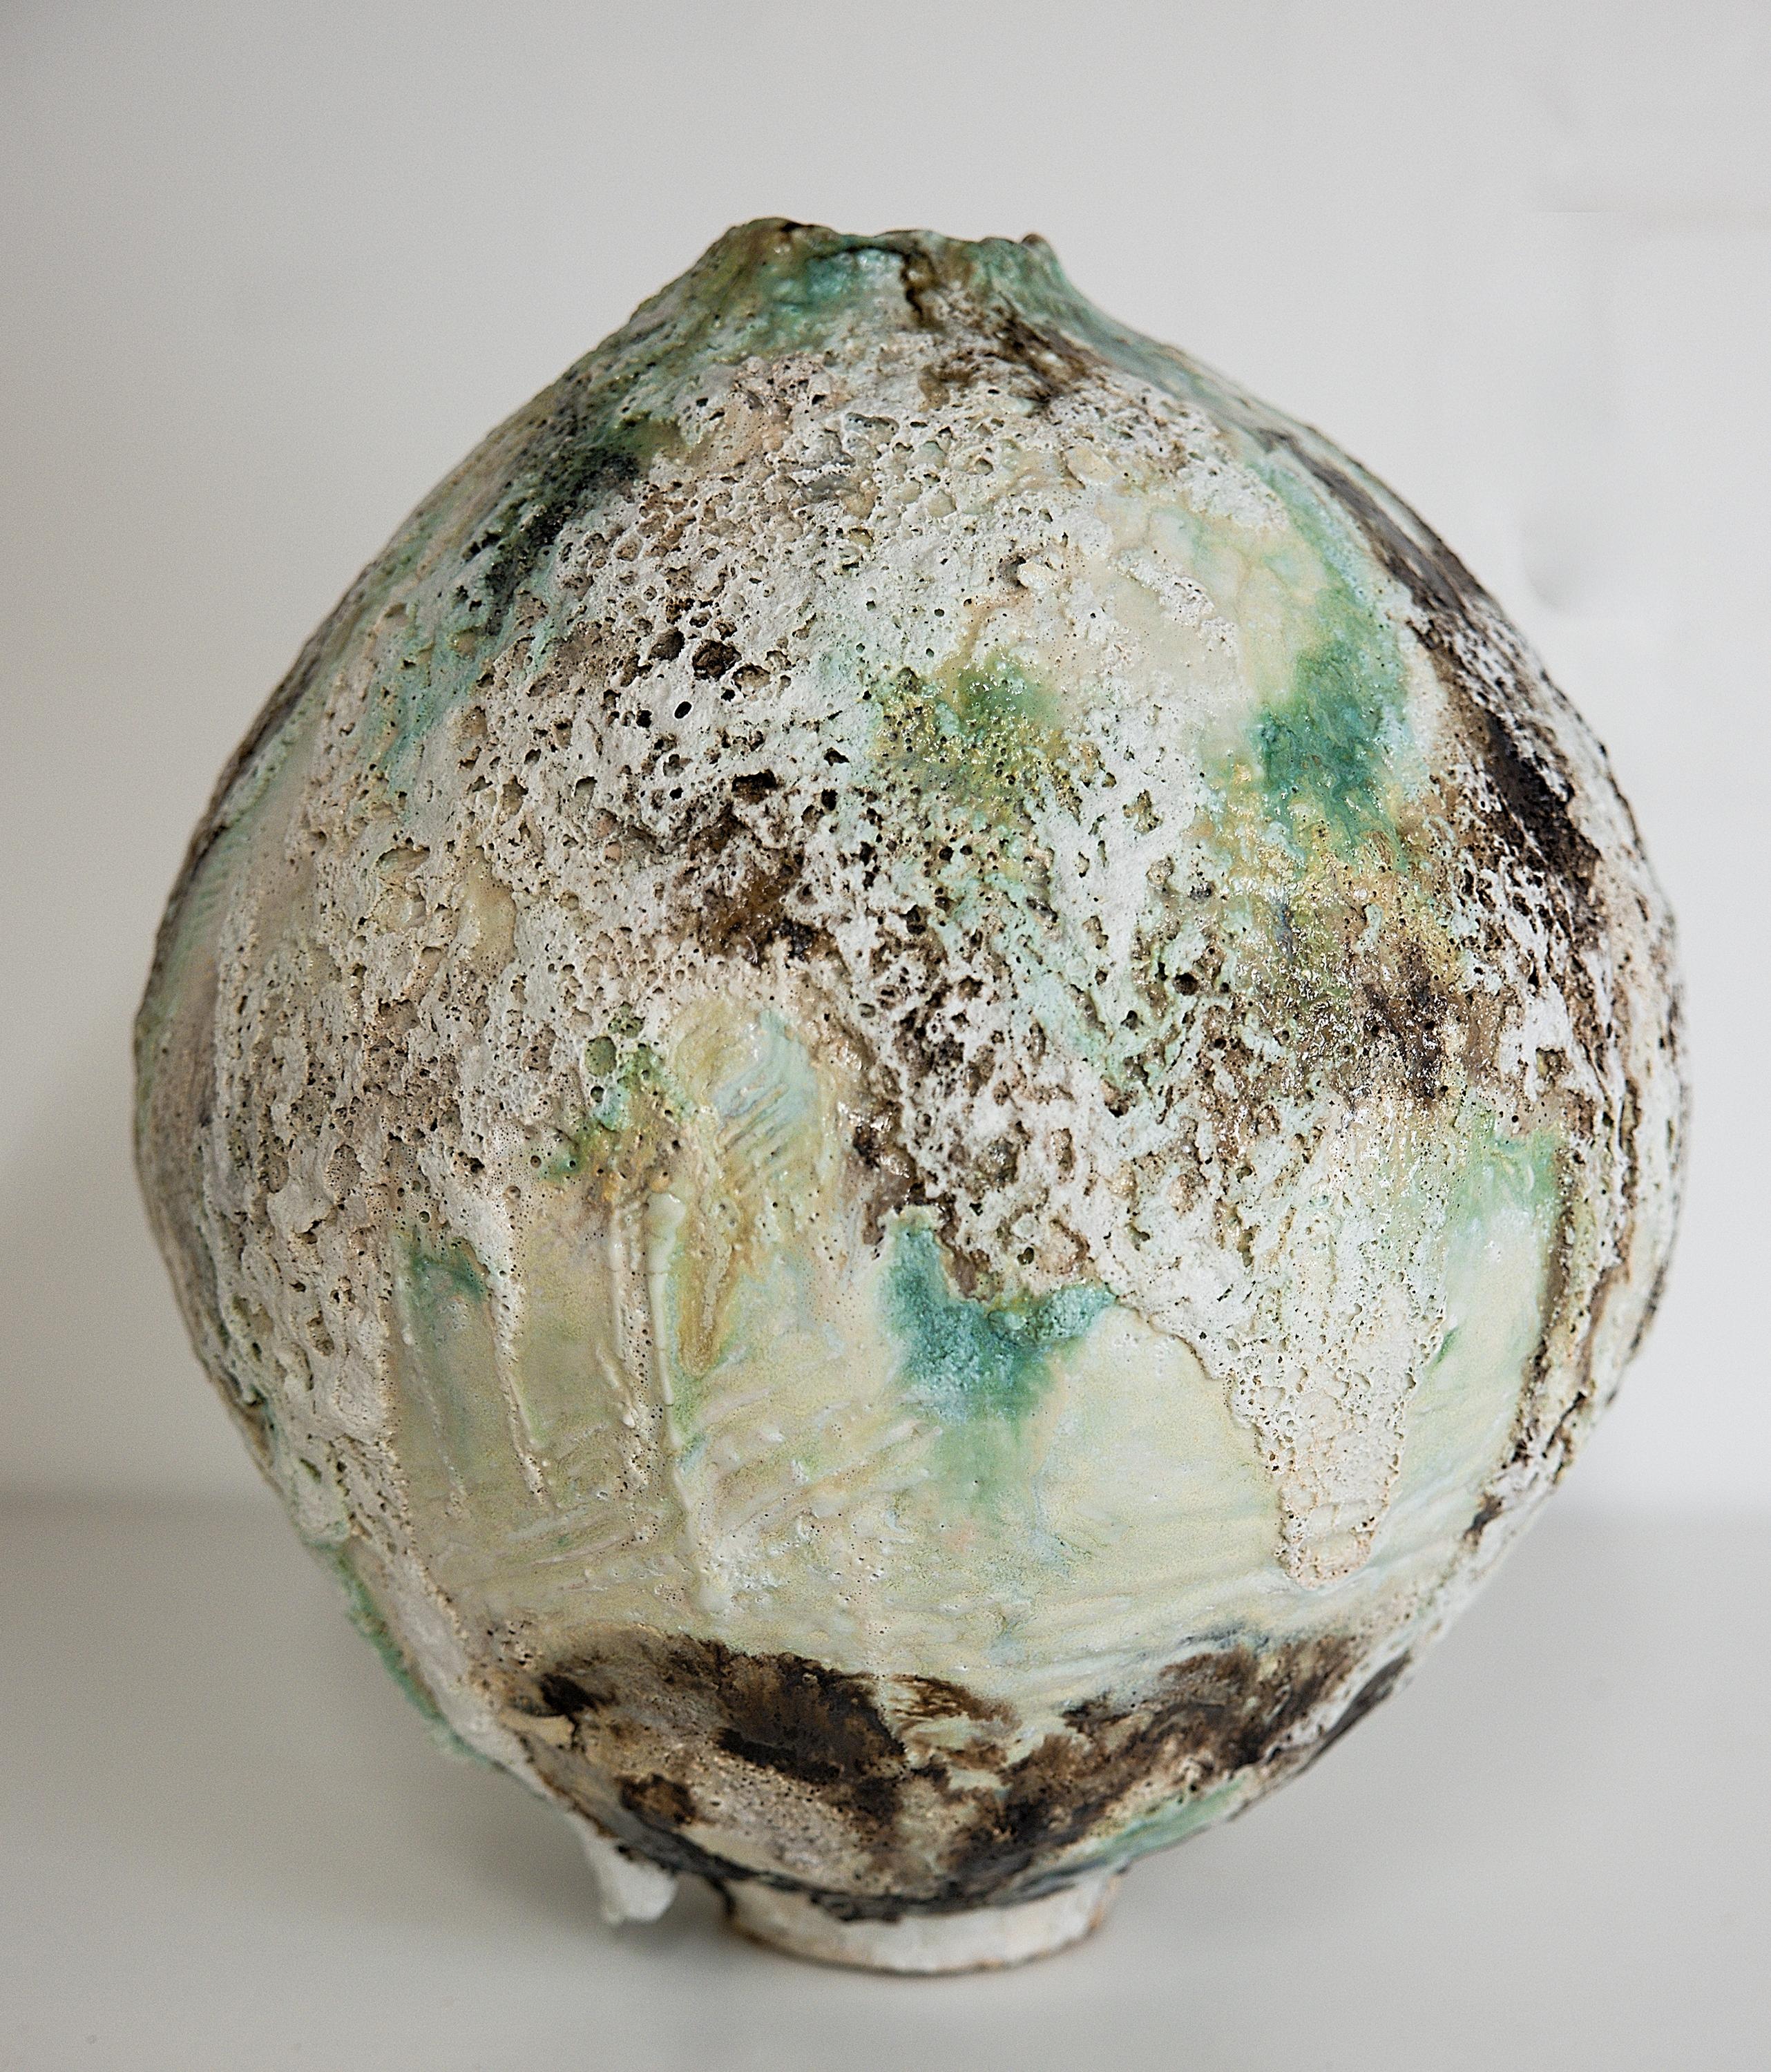 WOODLAND SERIES 

Large Moon Vase approx 16inches tall x 14.6 inches wide
Heavy: 26 lbs
a mix of traditional with organic modern this Large Moon jar  shape with texture and many layers of custom glazes. some raw clay, oxides, volcanic glaze
TEST FOR